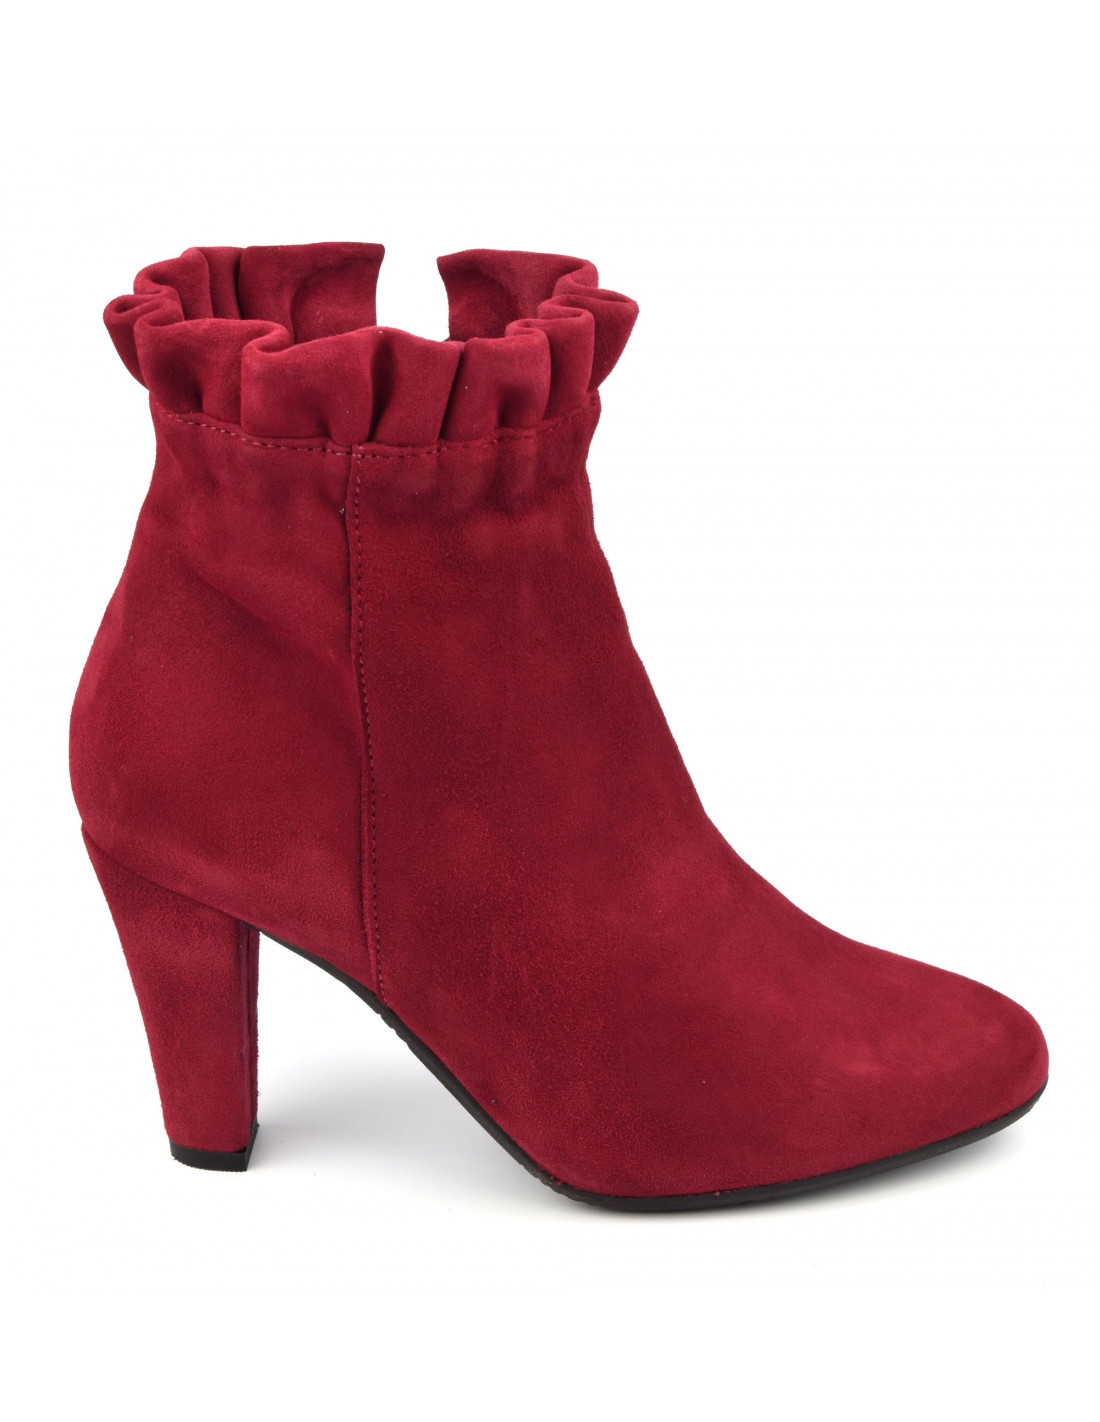 Ruffle ankle boots, small sizes, red suede leather, Valfie, Bella B